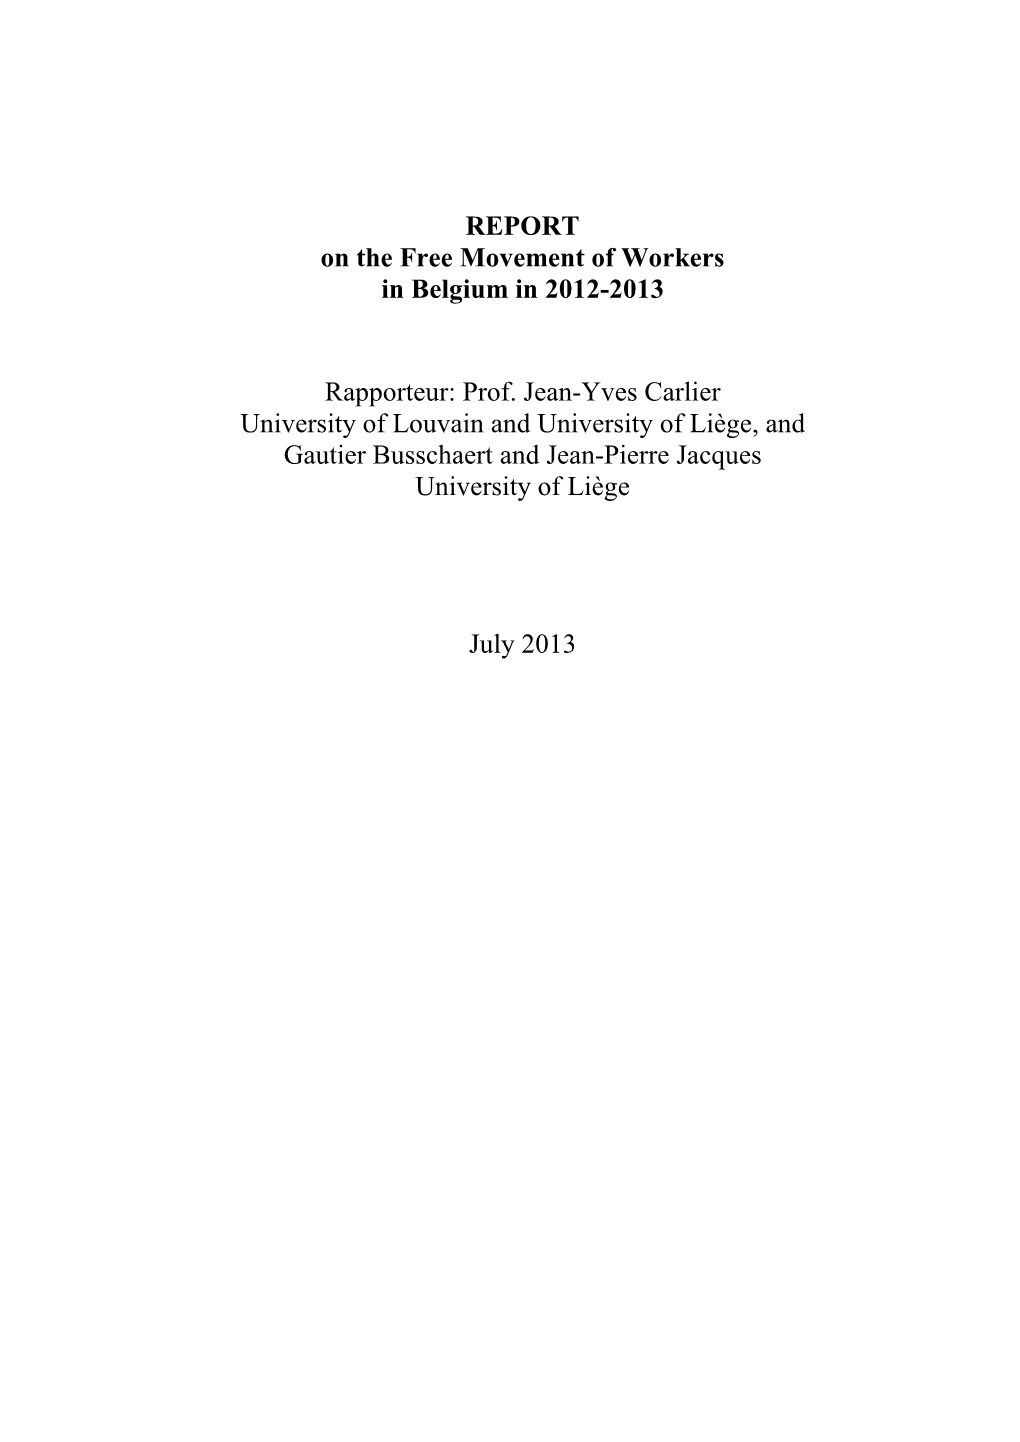 REPORT on the Free Movement of Workers in Belgium in 2012-2013